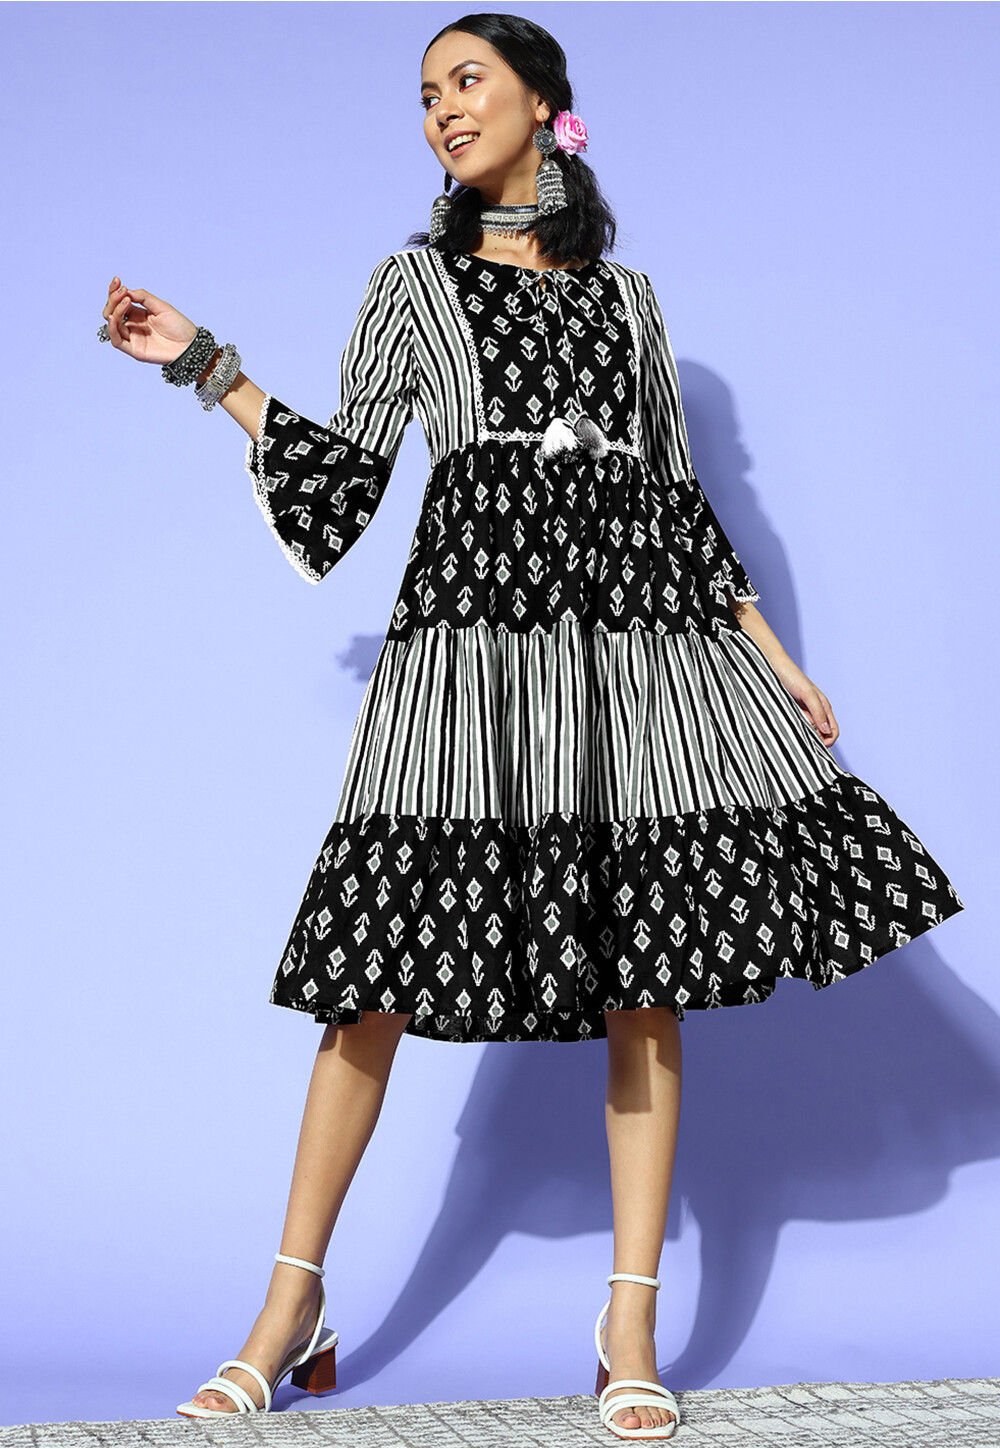 Printed Pure Cotton Midi Dress with Jacket in Black